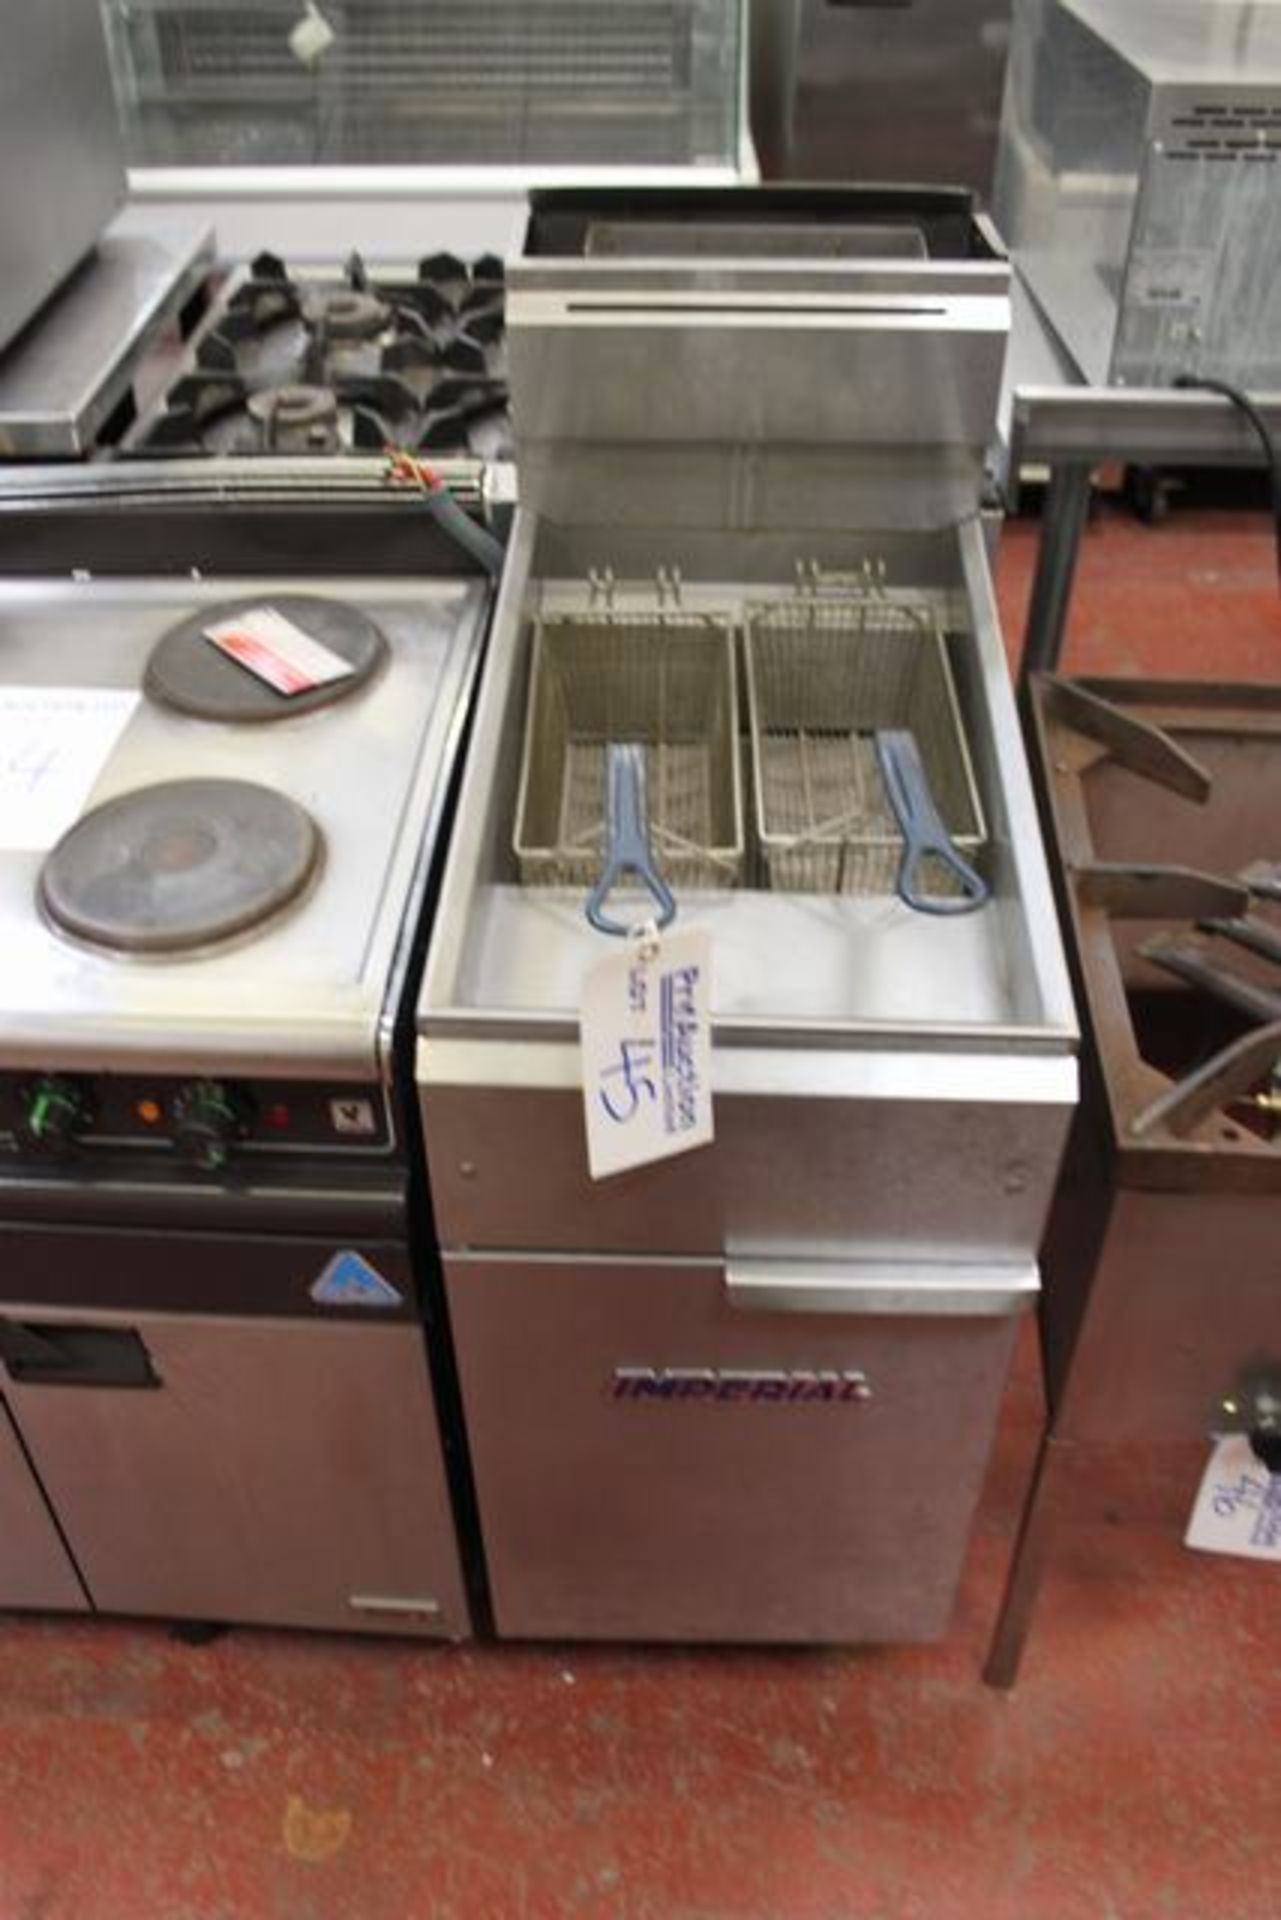 Imperial Elite C IFS-40 natural gas fryer three heavy duty burner stainless steel tank tube fired